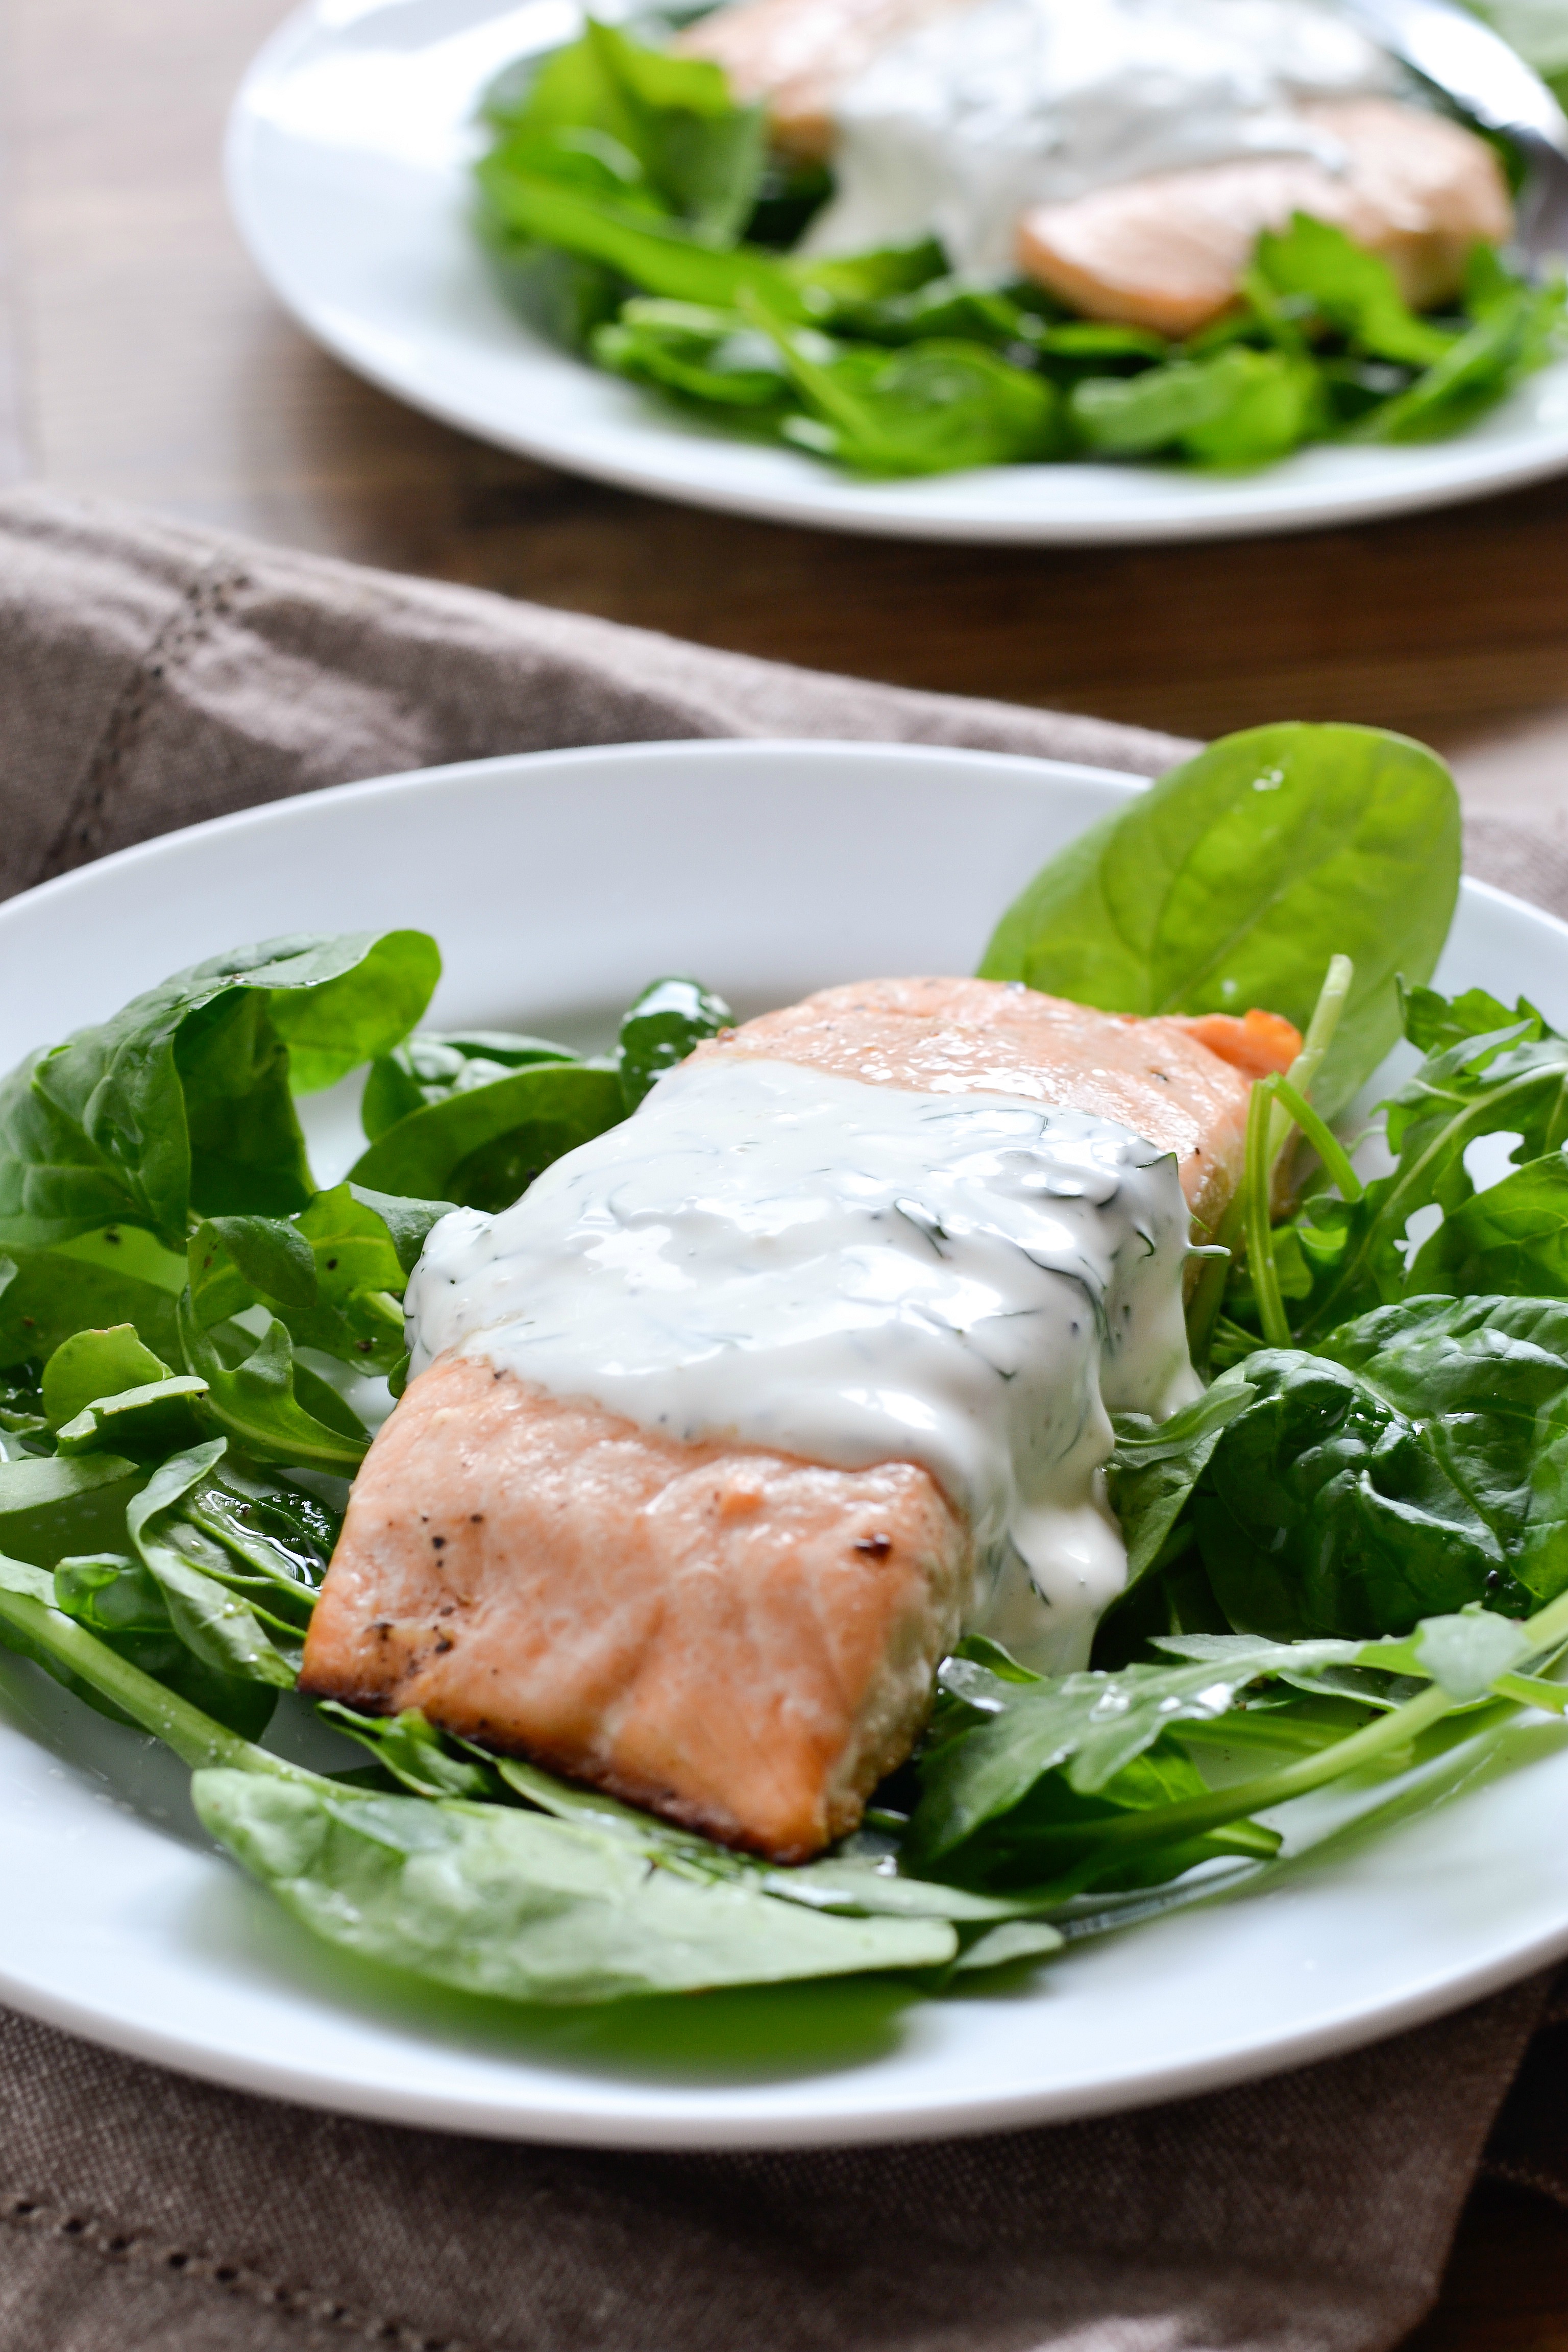 30 Minute Meal – Baked Lemon Pepper Salmon with Creamy Dill Sauce